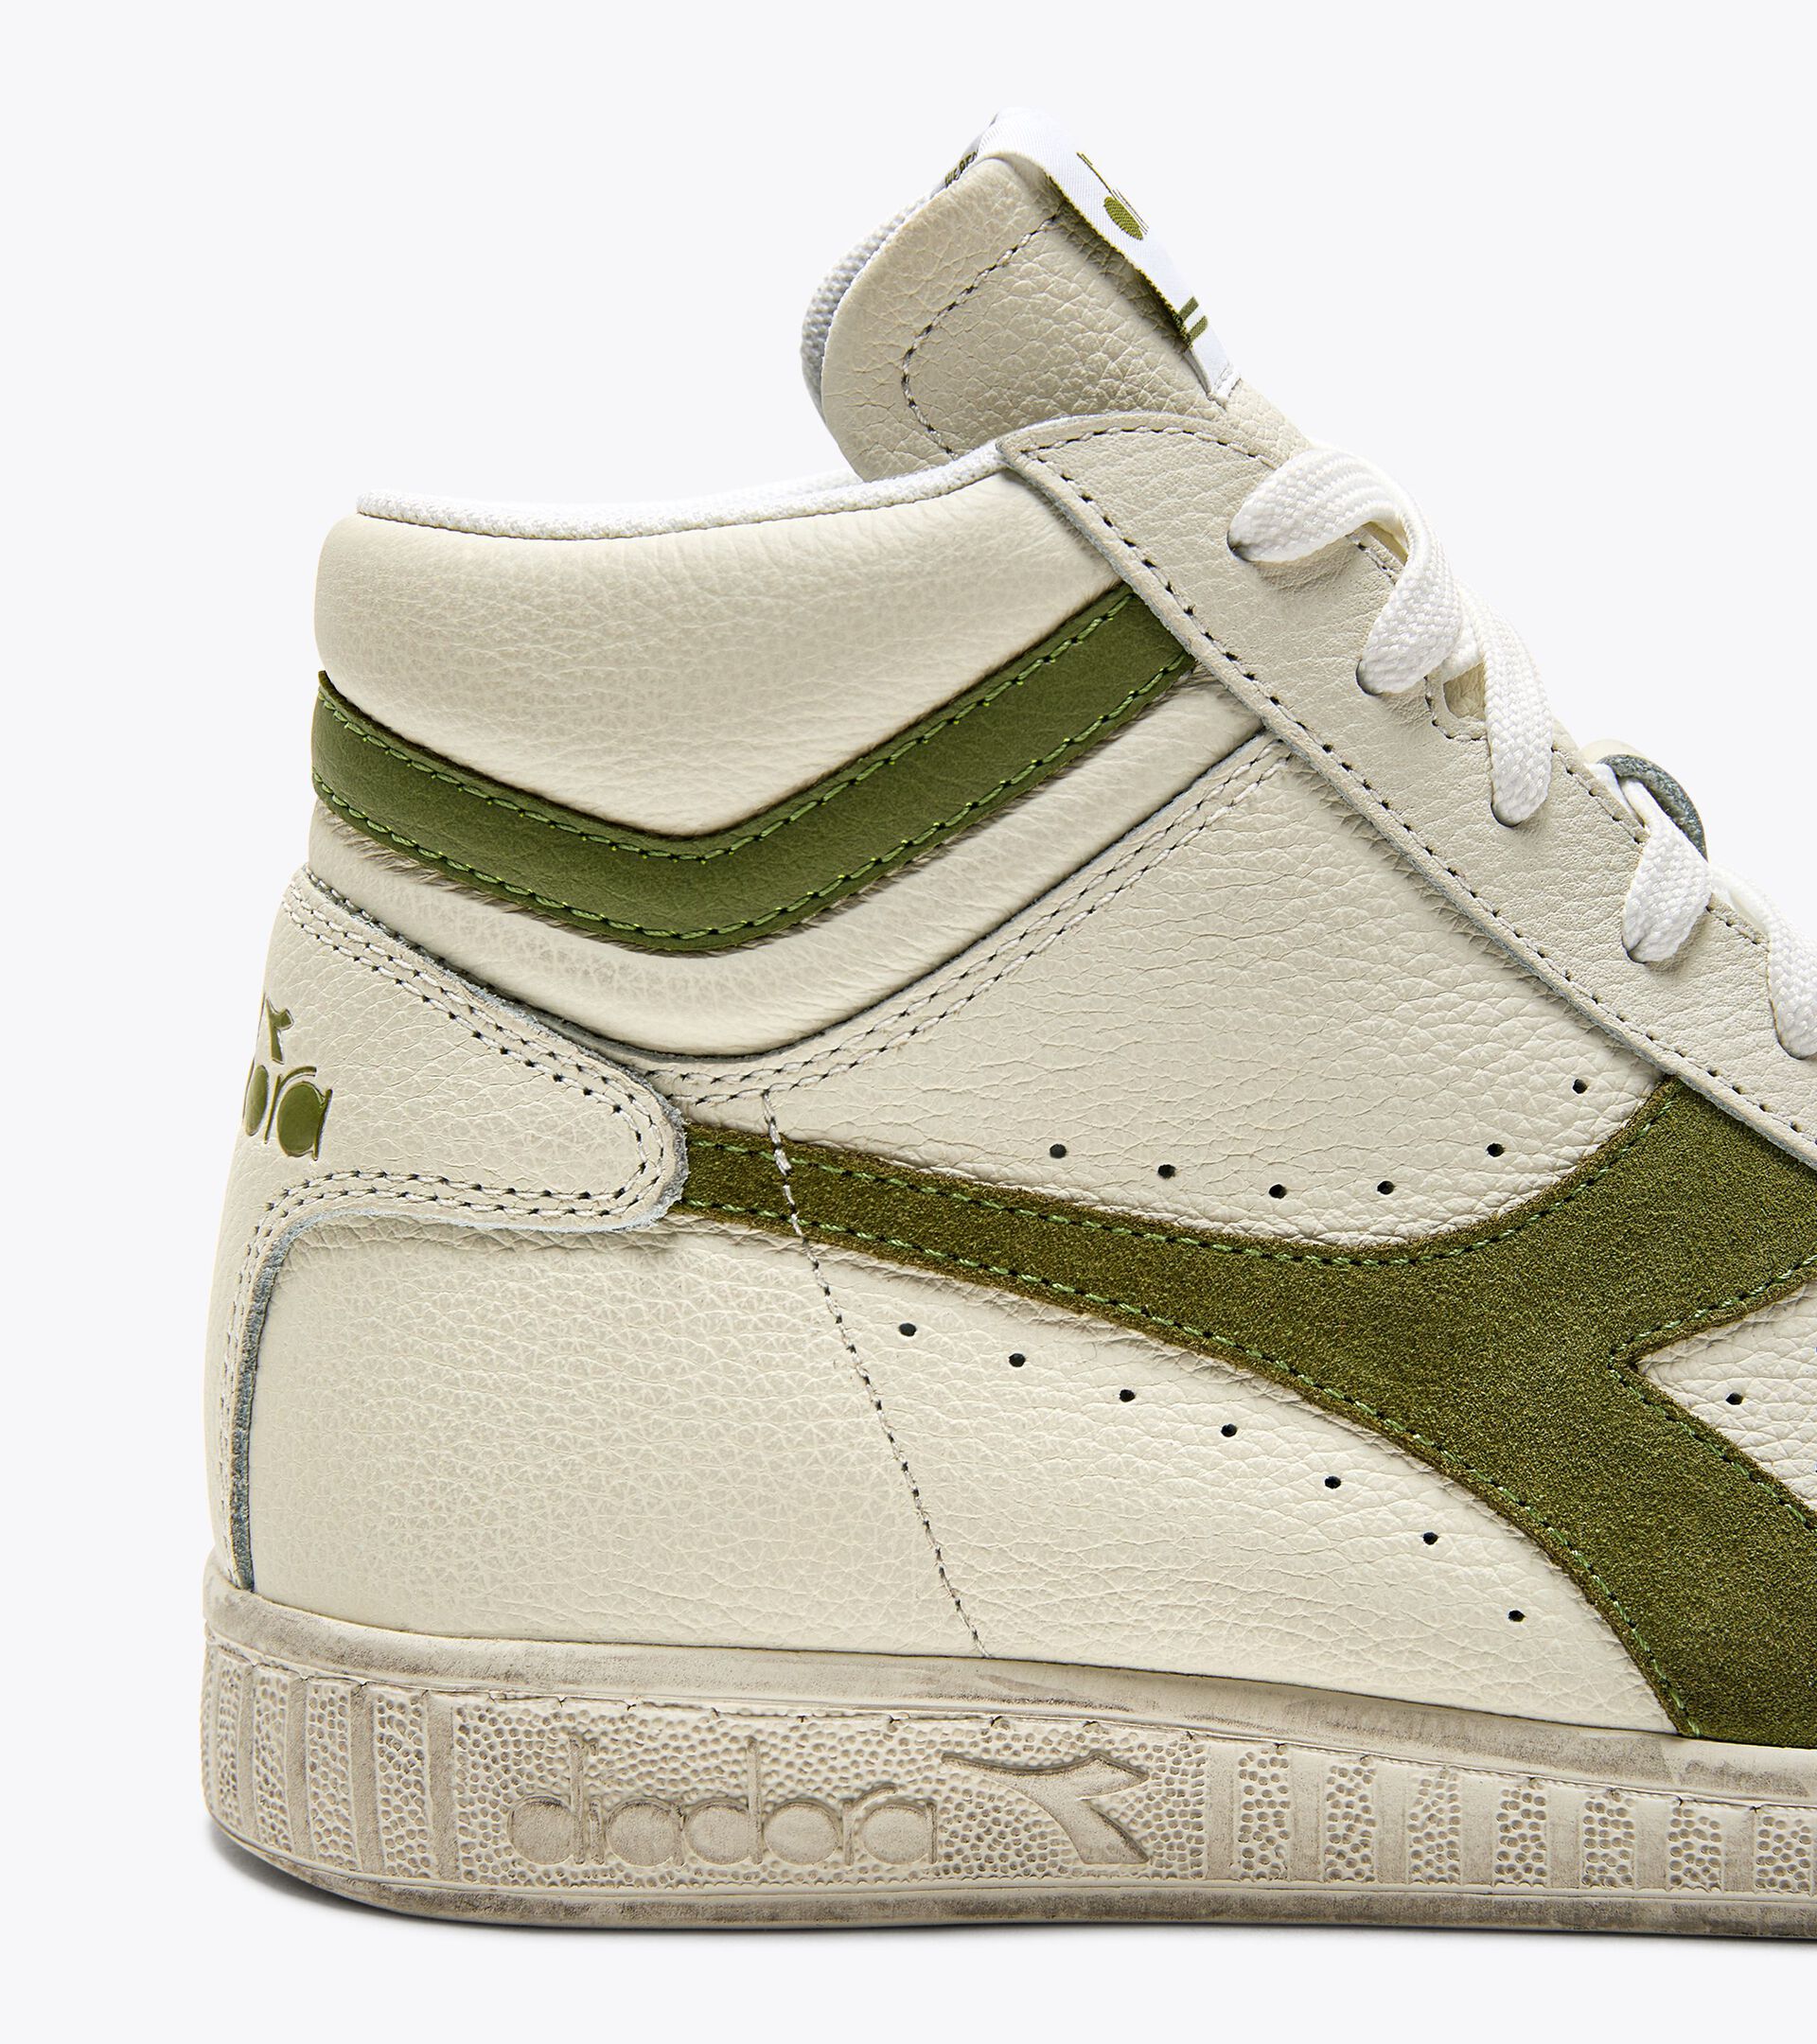 Sporty sneakers - Gender neutral GAME L HIGH WAXED SUEDE POP WHITE/FERN - Diadora